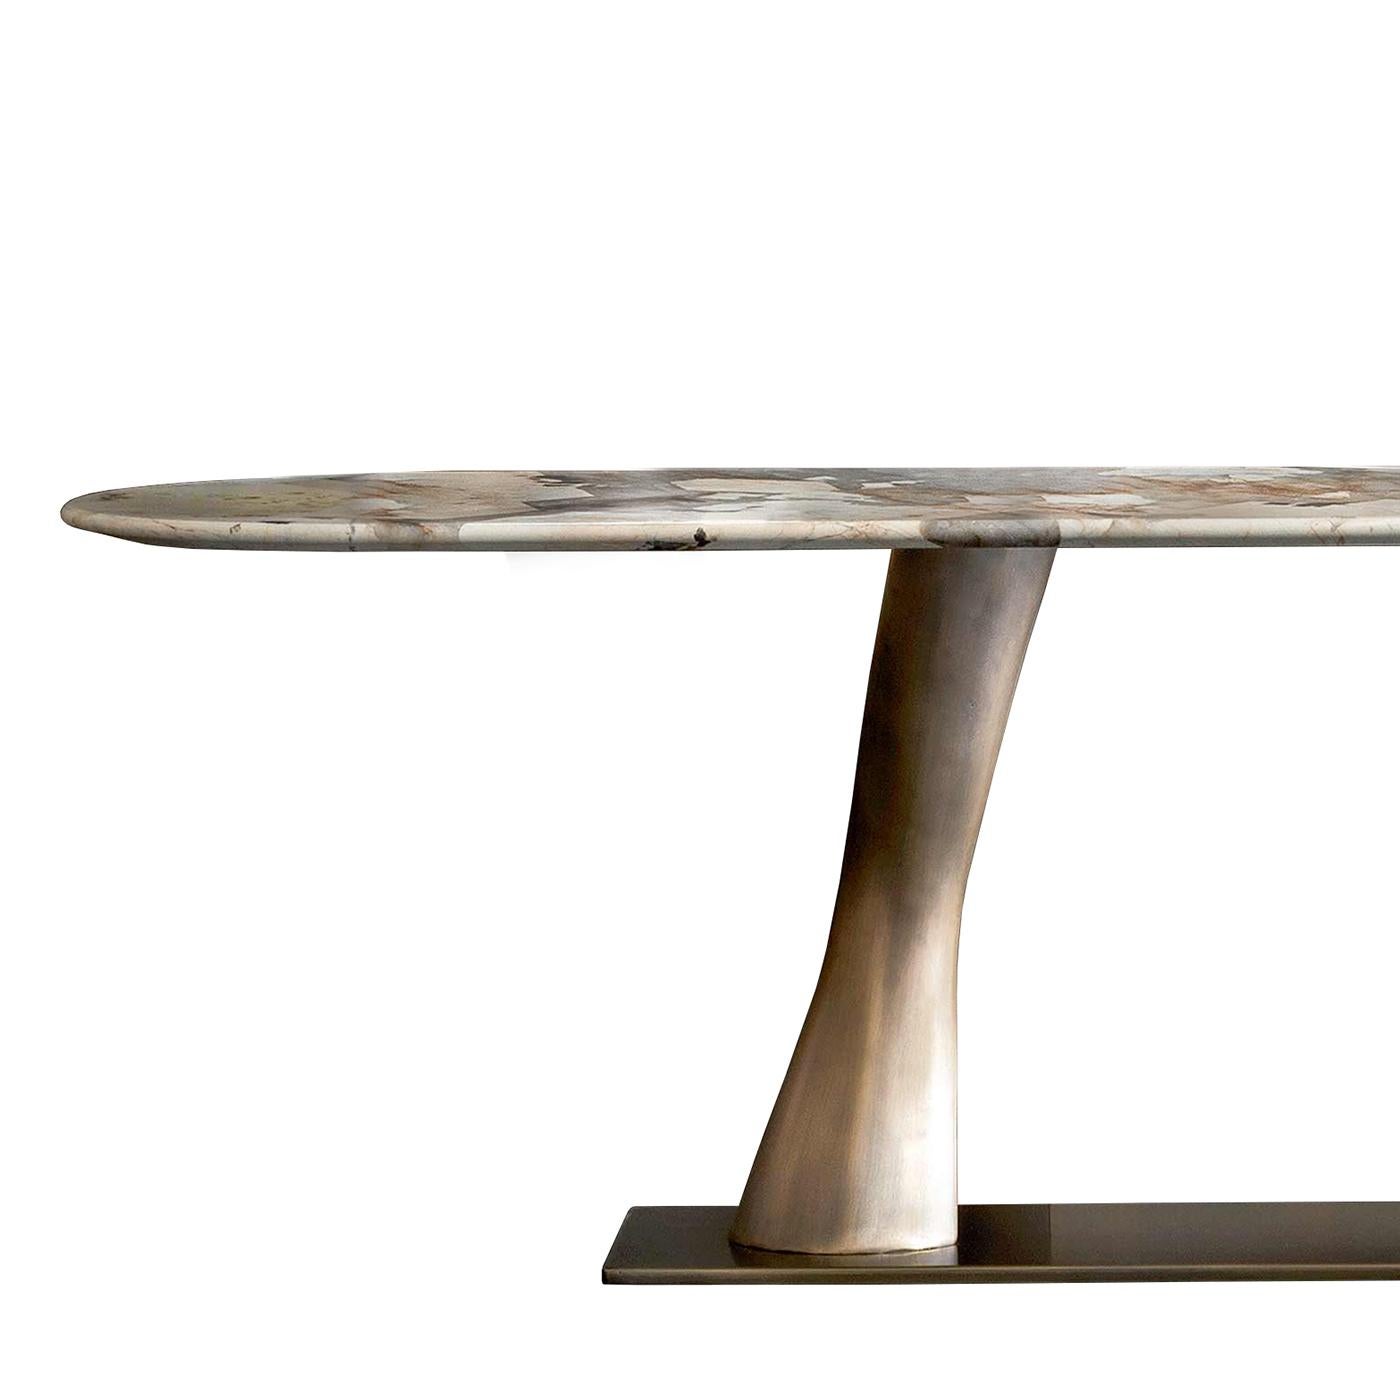 Console table comet marble with solid bronze base
with 2 twisted bronze feet. With long oval calacatta
marble top, high marble quality.
Exceptional piece.
Also available with long oval Emperador marble top,
price: 16900,00€.